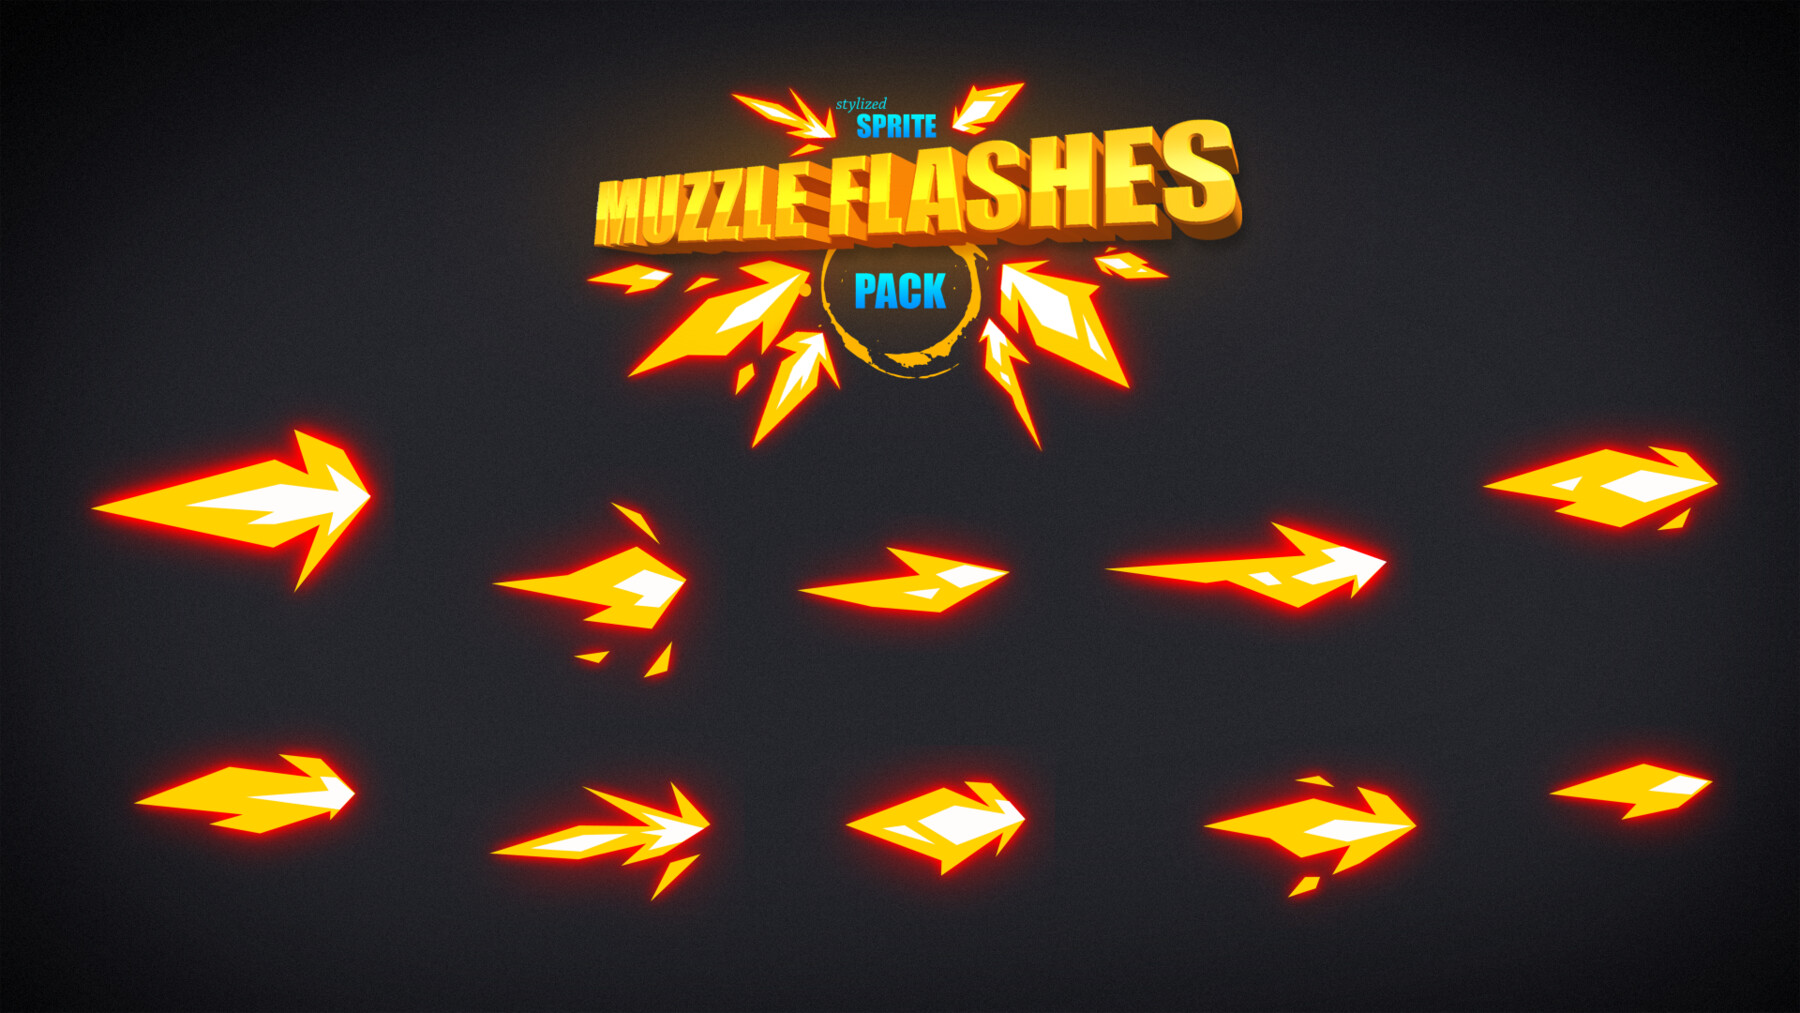 ArtStation - Sprite muzzle flashes | Game Assets